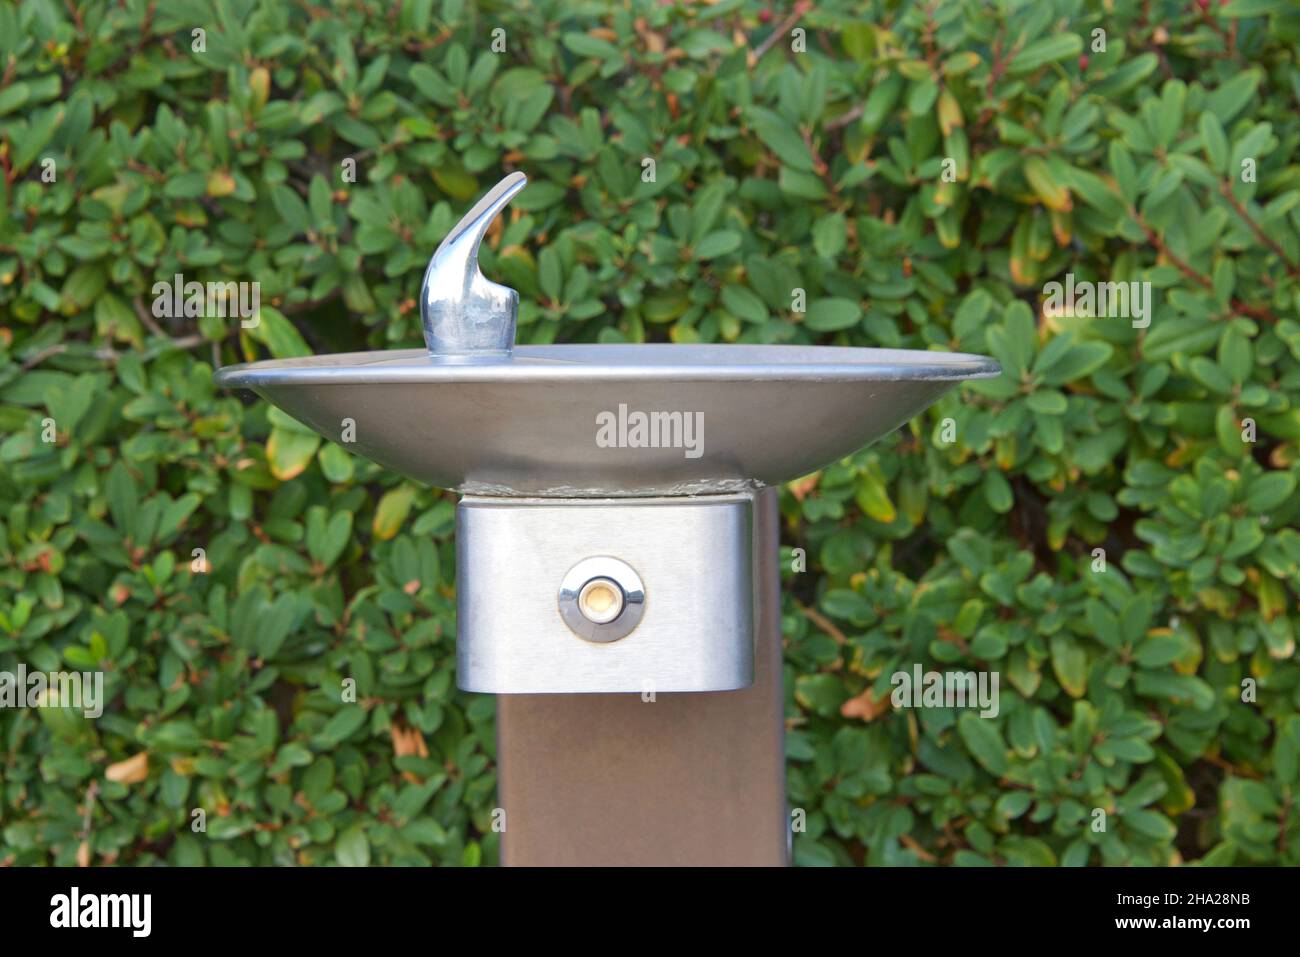 Close up of one push button stainless steel water fountain outside with green bushes in background. Stock Photo